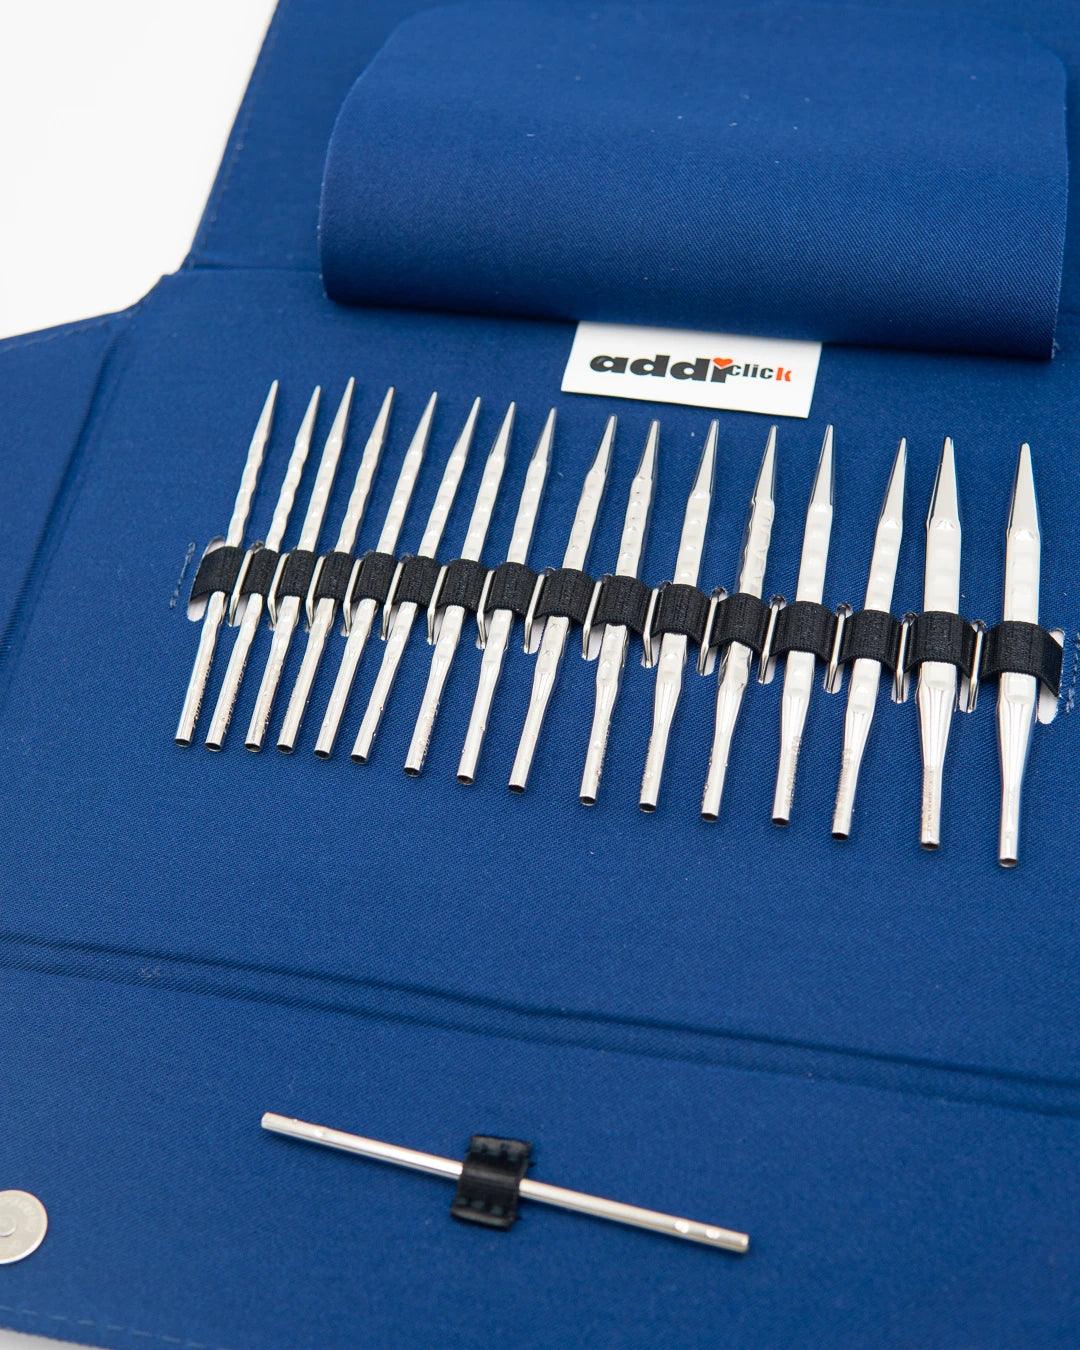 addiClick Interchangeable Needle Set (Shorties Rocket 2 [Squared]) - Aimee Sher Makes